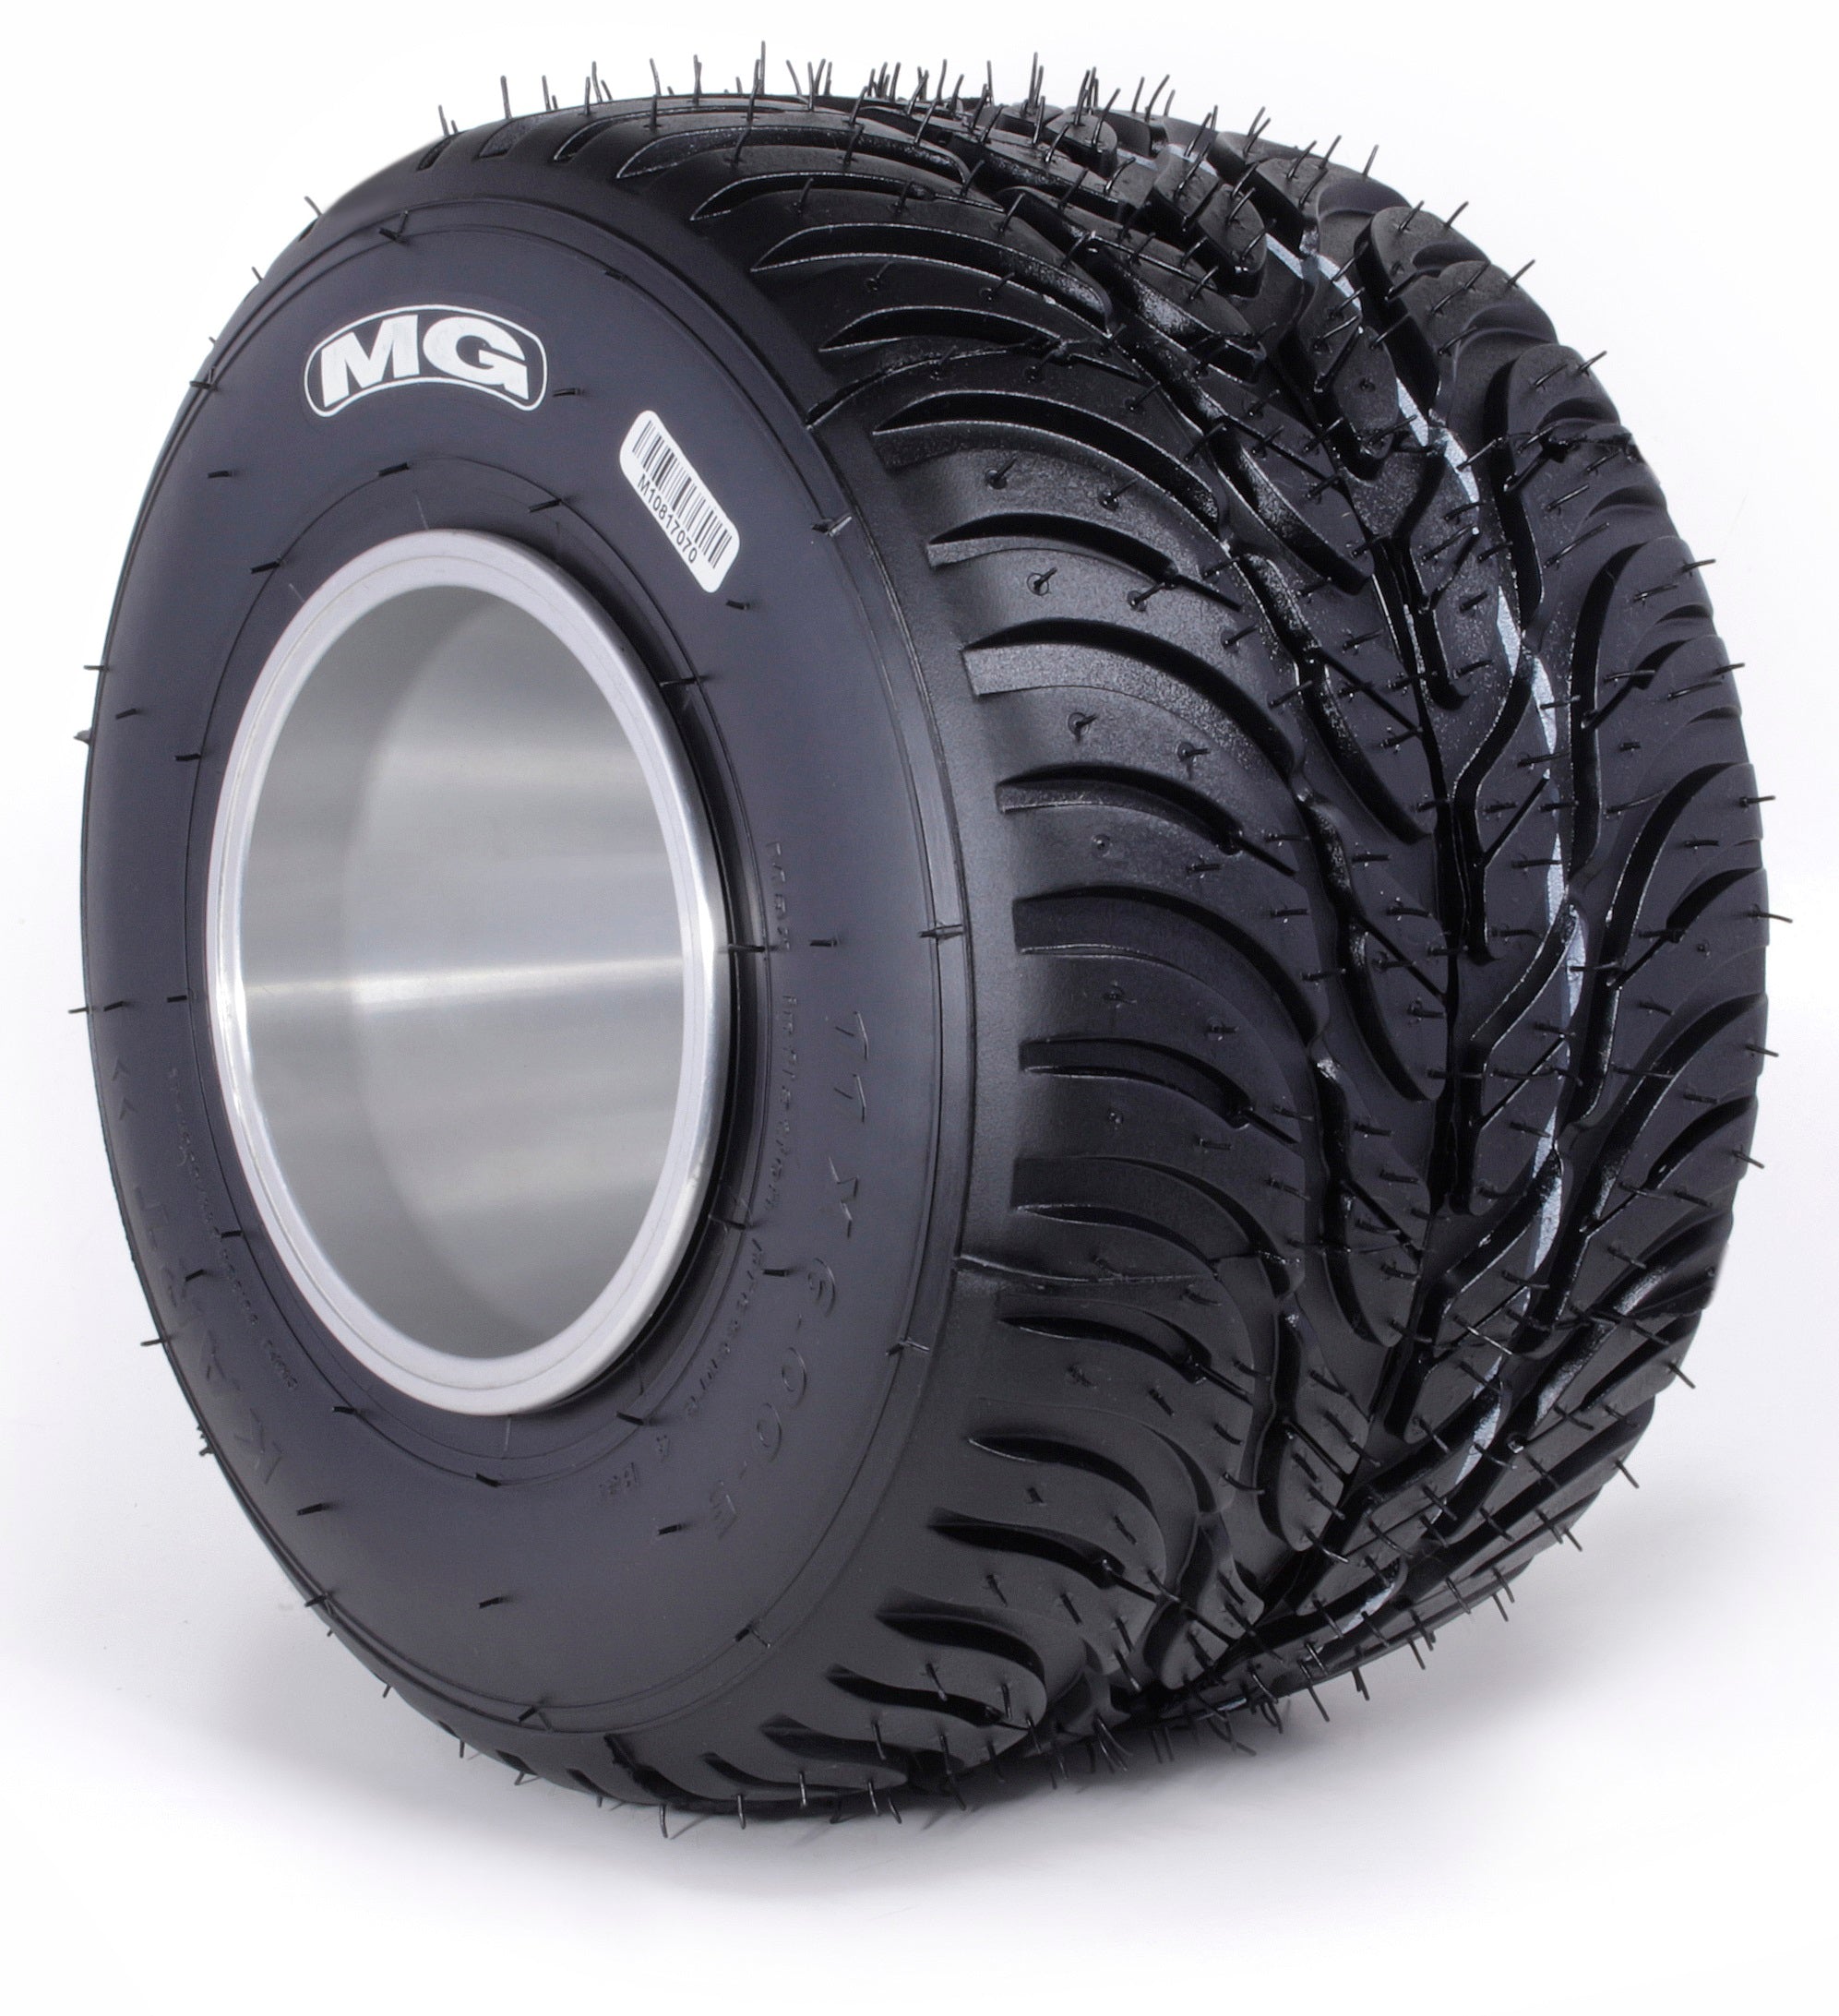 MG Tyre SW White